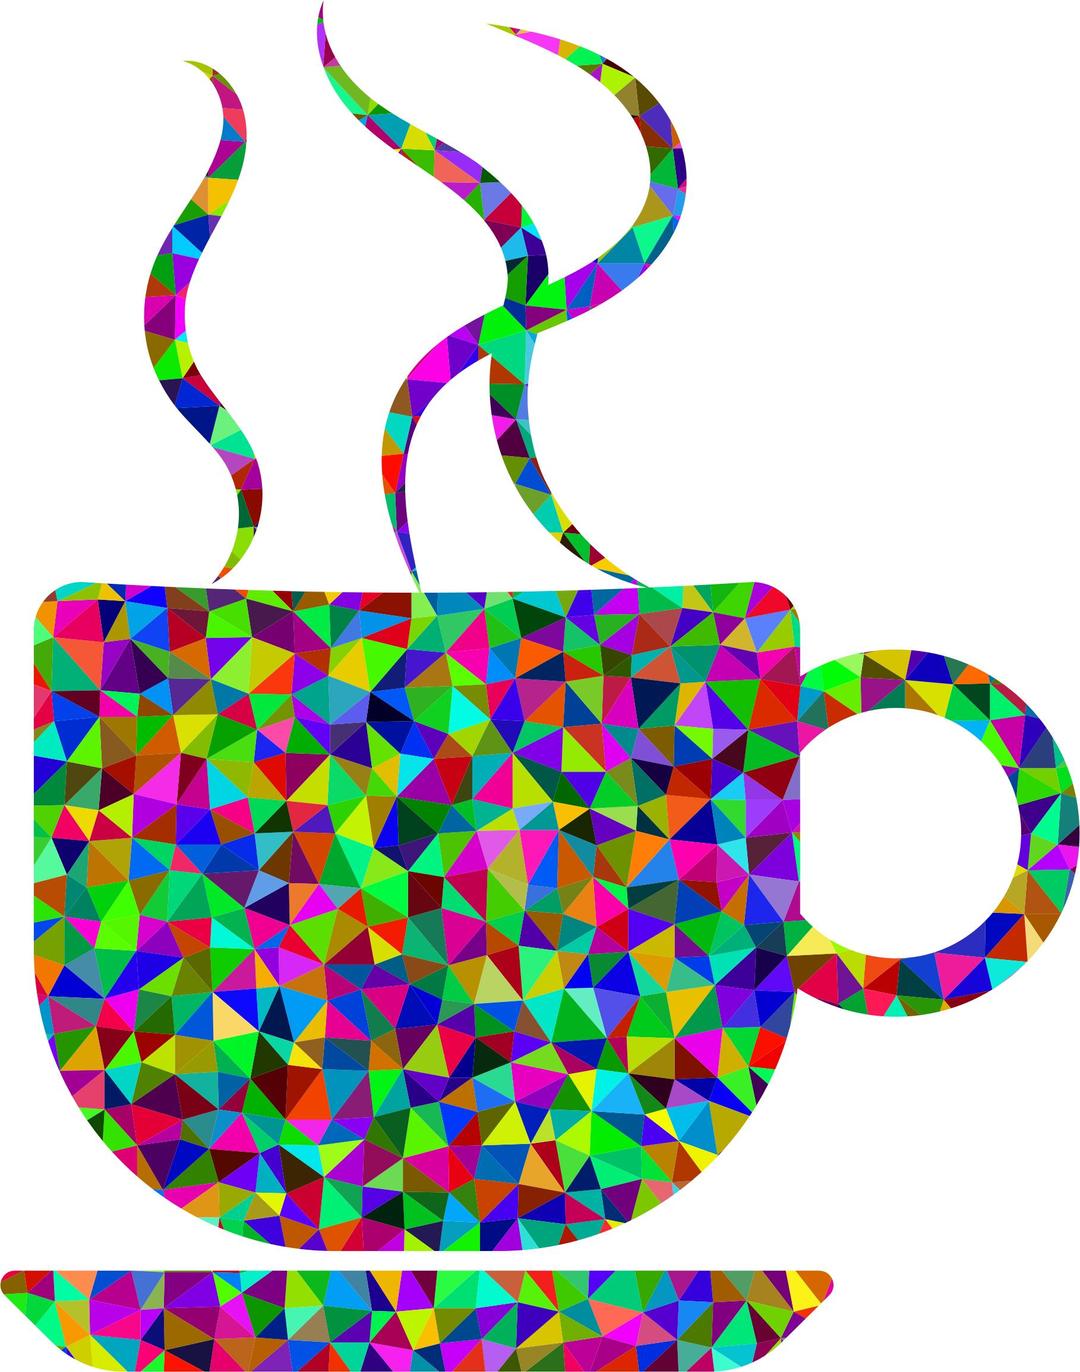 Prismatic Low Poly Coffee Cup png transparent